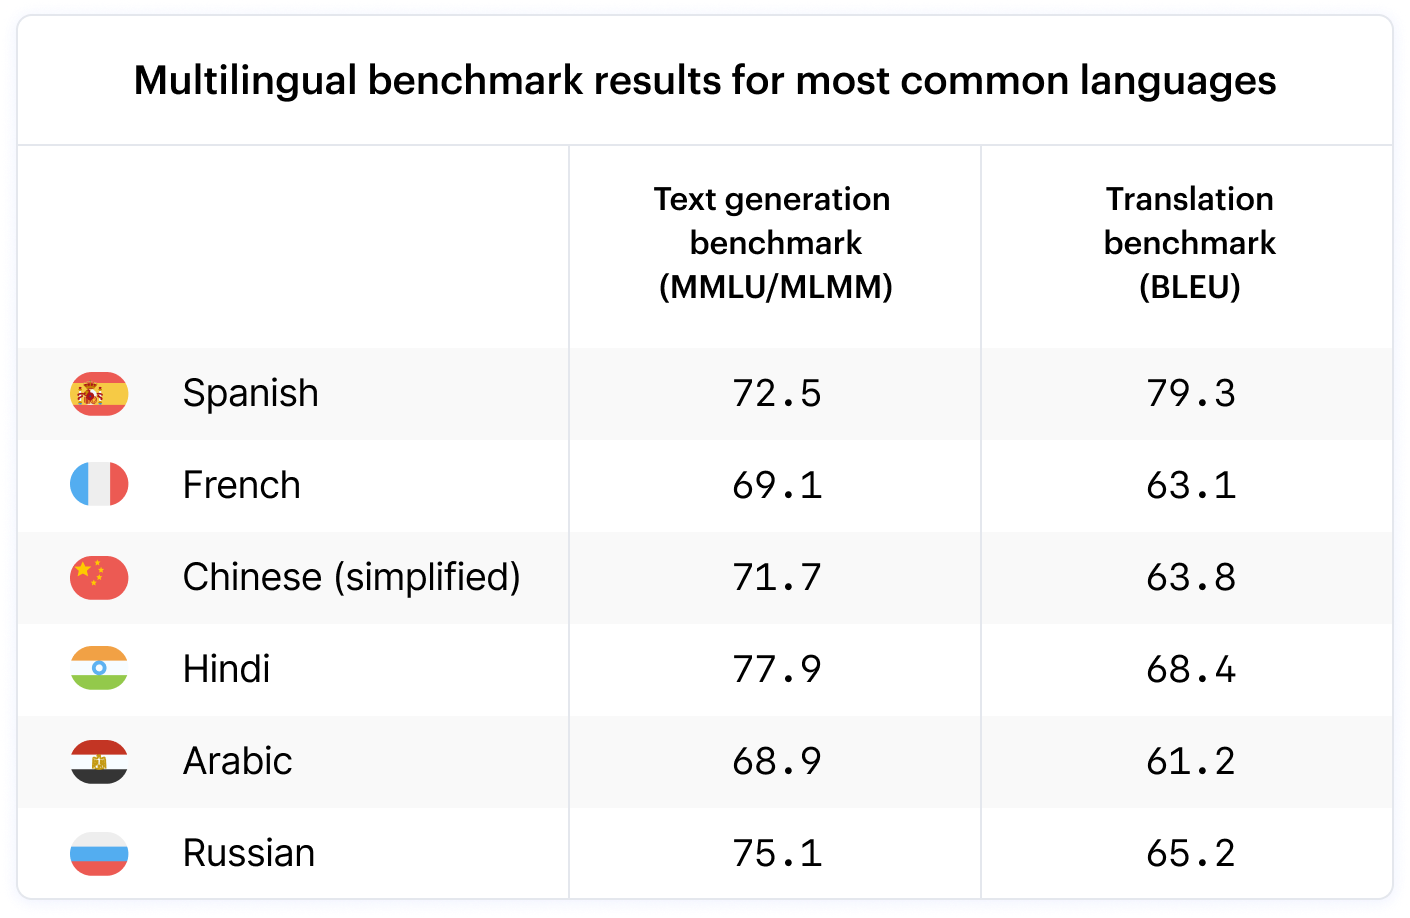 Multilingual benchmark results for most common languages

Text generation benchmark (MMLU/MLMM)
Spanish: 72.5
French: 69.1
Chinese (simplified): 71.7
Hindi: 77.9
Arabic: 68.9
Russian: 75.1

Translation benchmark (BLEU)
Spanish: 79.3
French: 63.1
Chinese (simplified): 63.8
Hindi: 68.4
Arabic: 61.2
Russian: 65.2